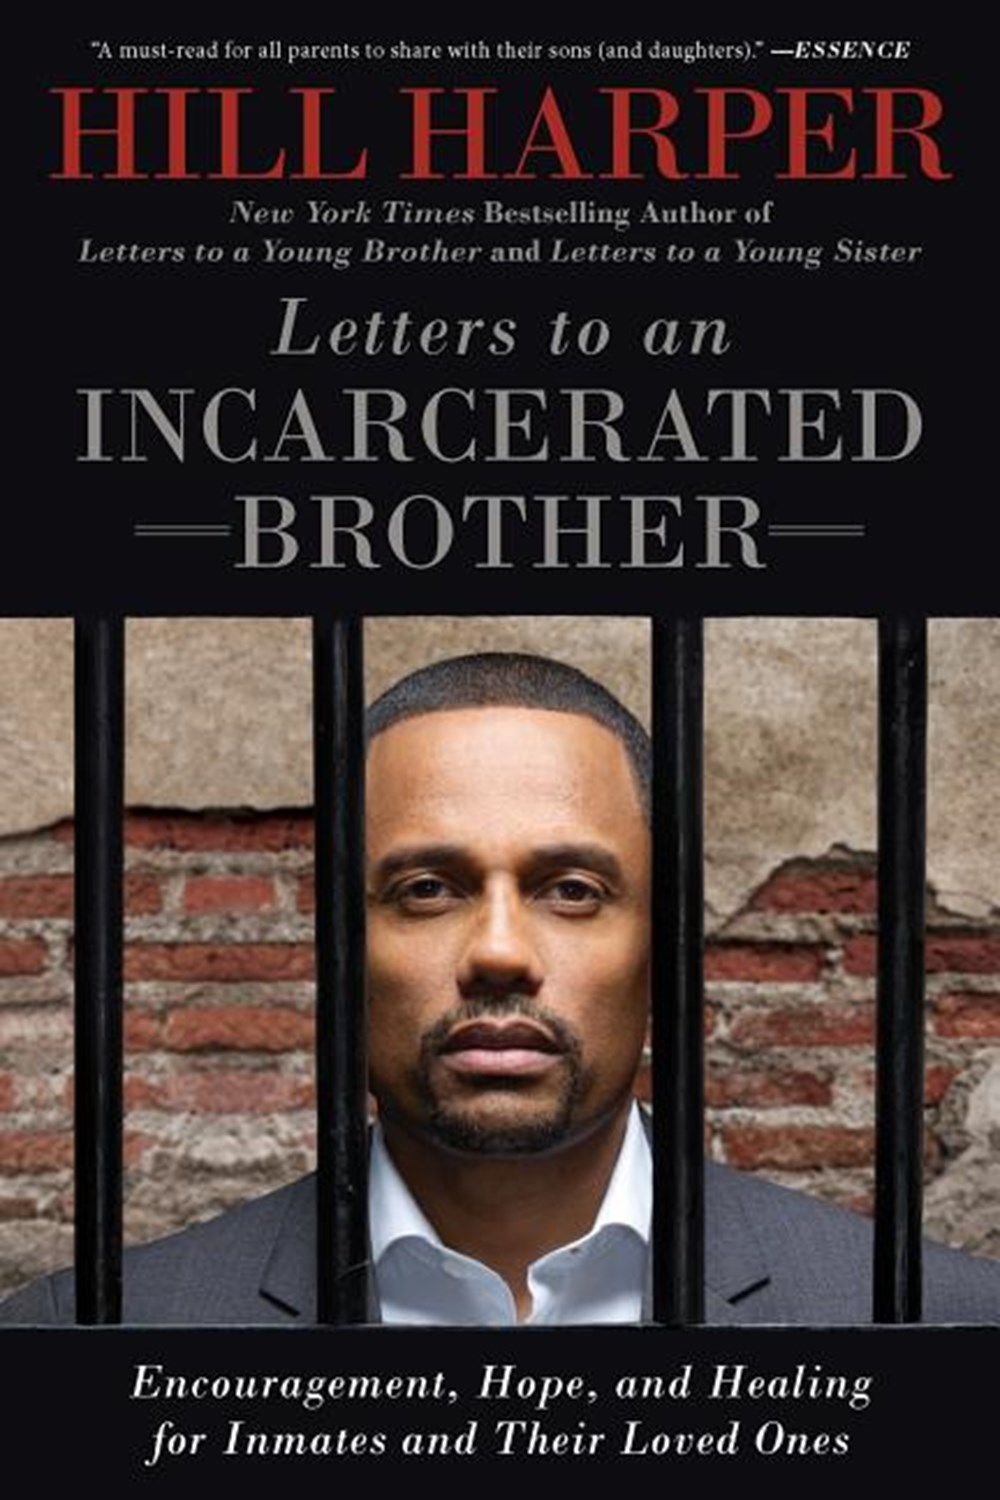 Letters to an Incarcerated Brother: Encouragement, Hope, and Healing for Inmates and Their Loved One